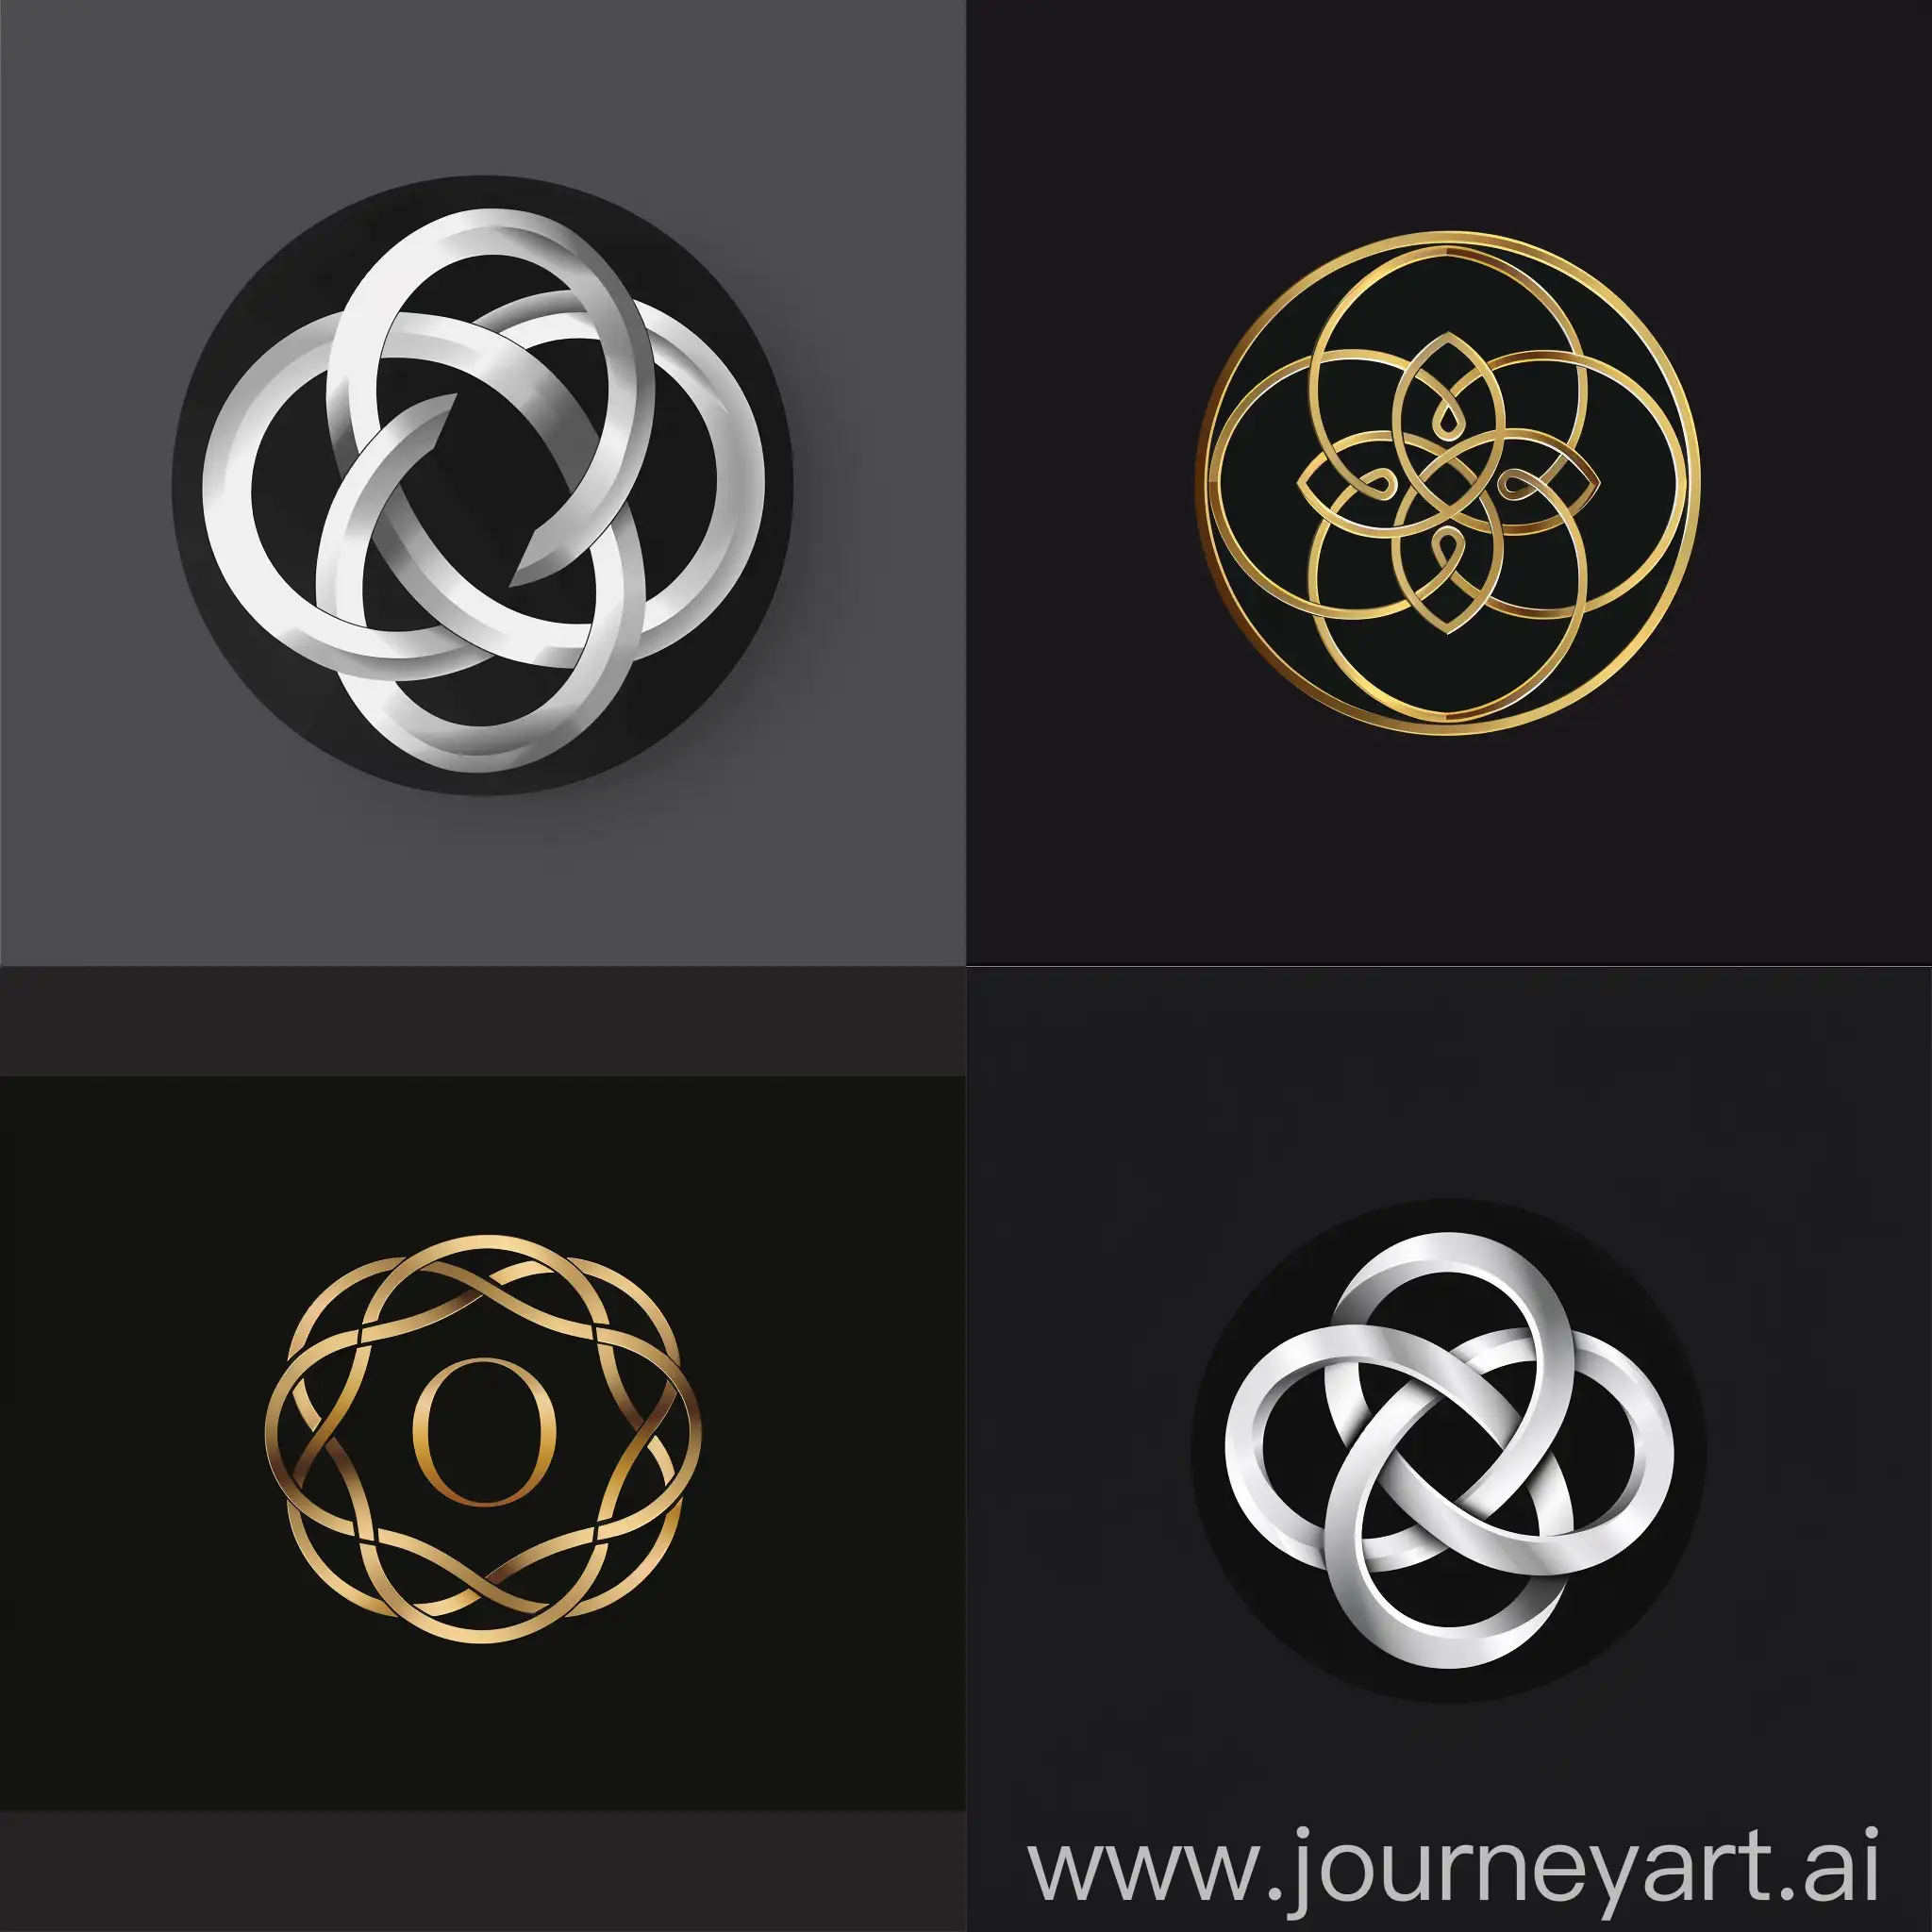 Circular-Logo-Design-with-Intertwined-Letters-L-and-O